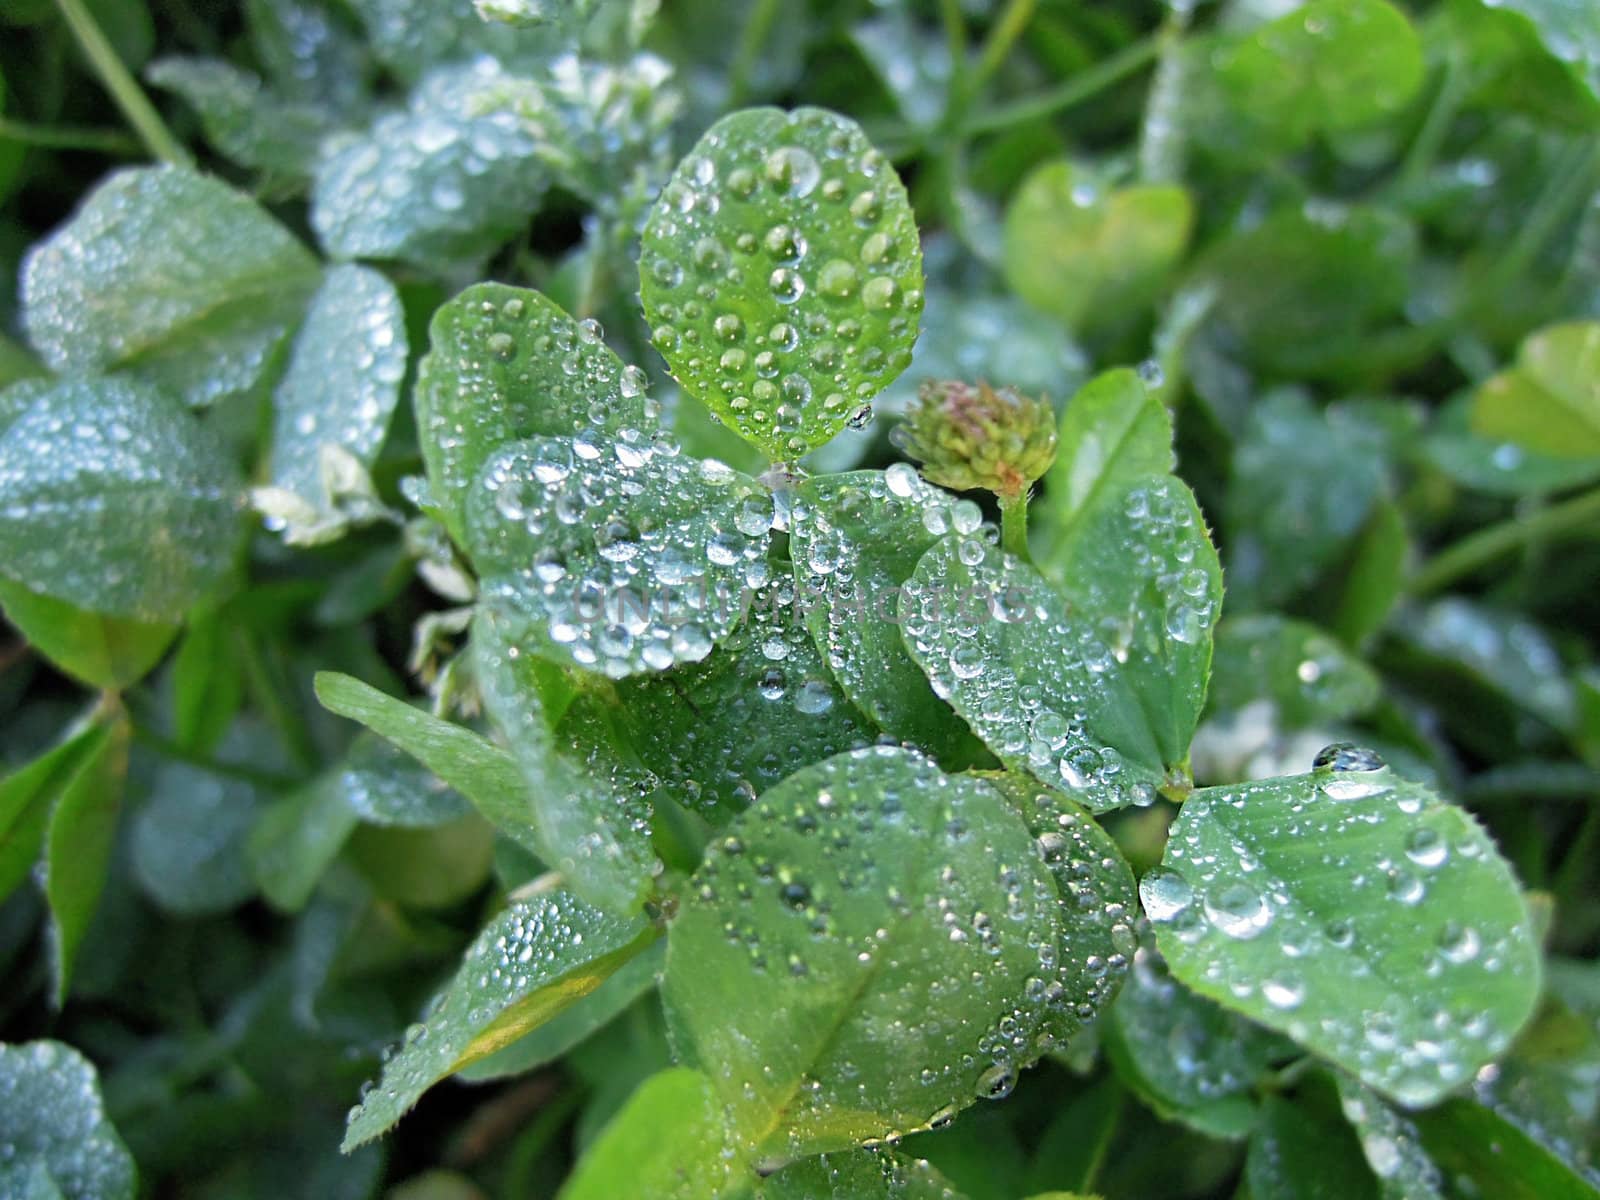 Some drops of water on green clover's petal